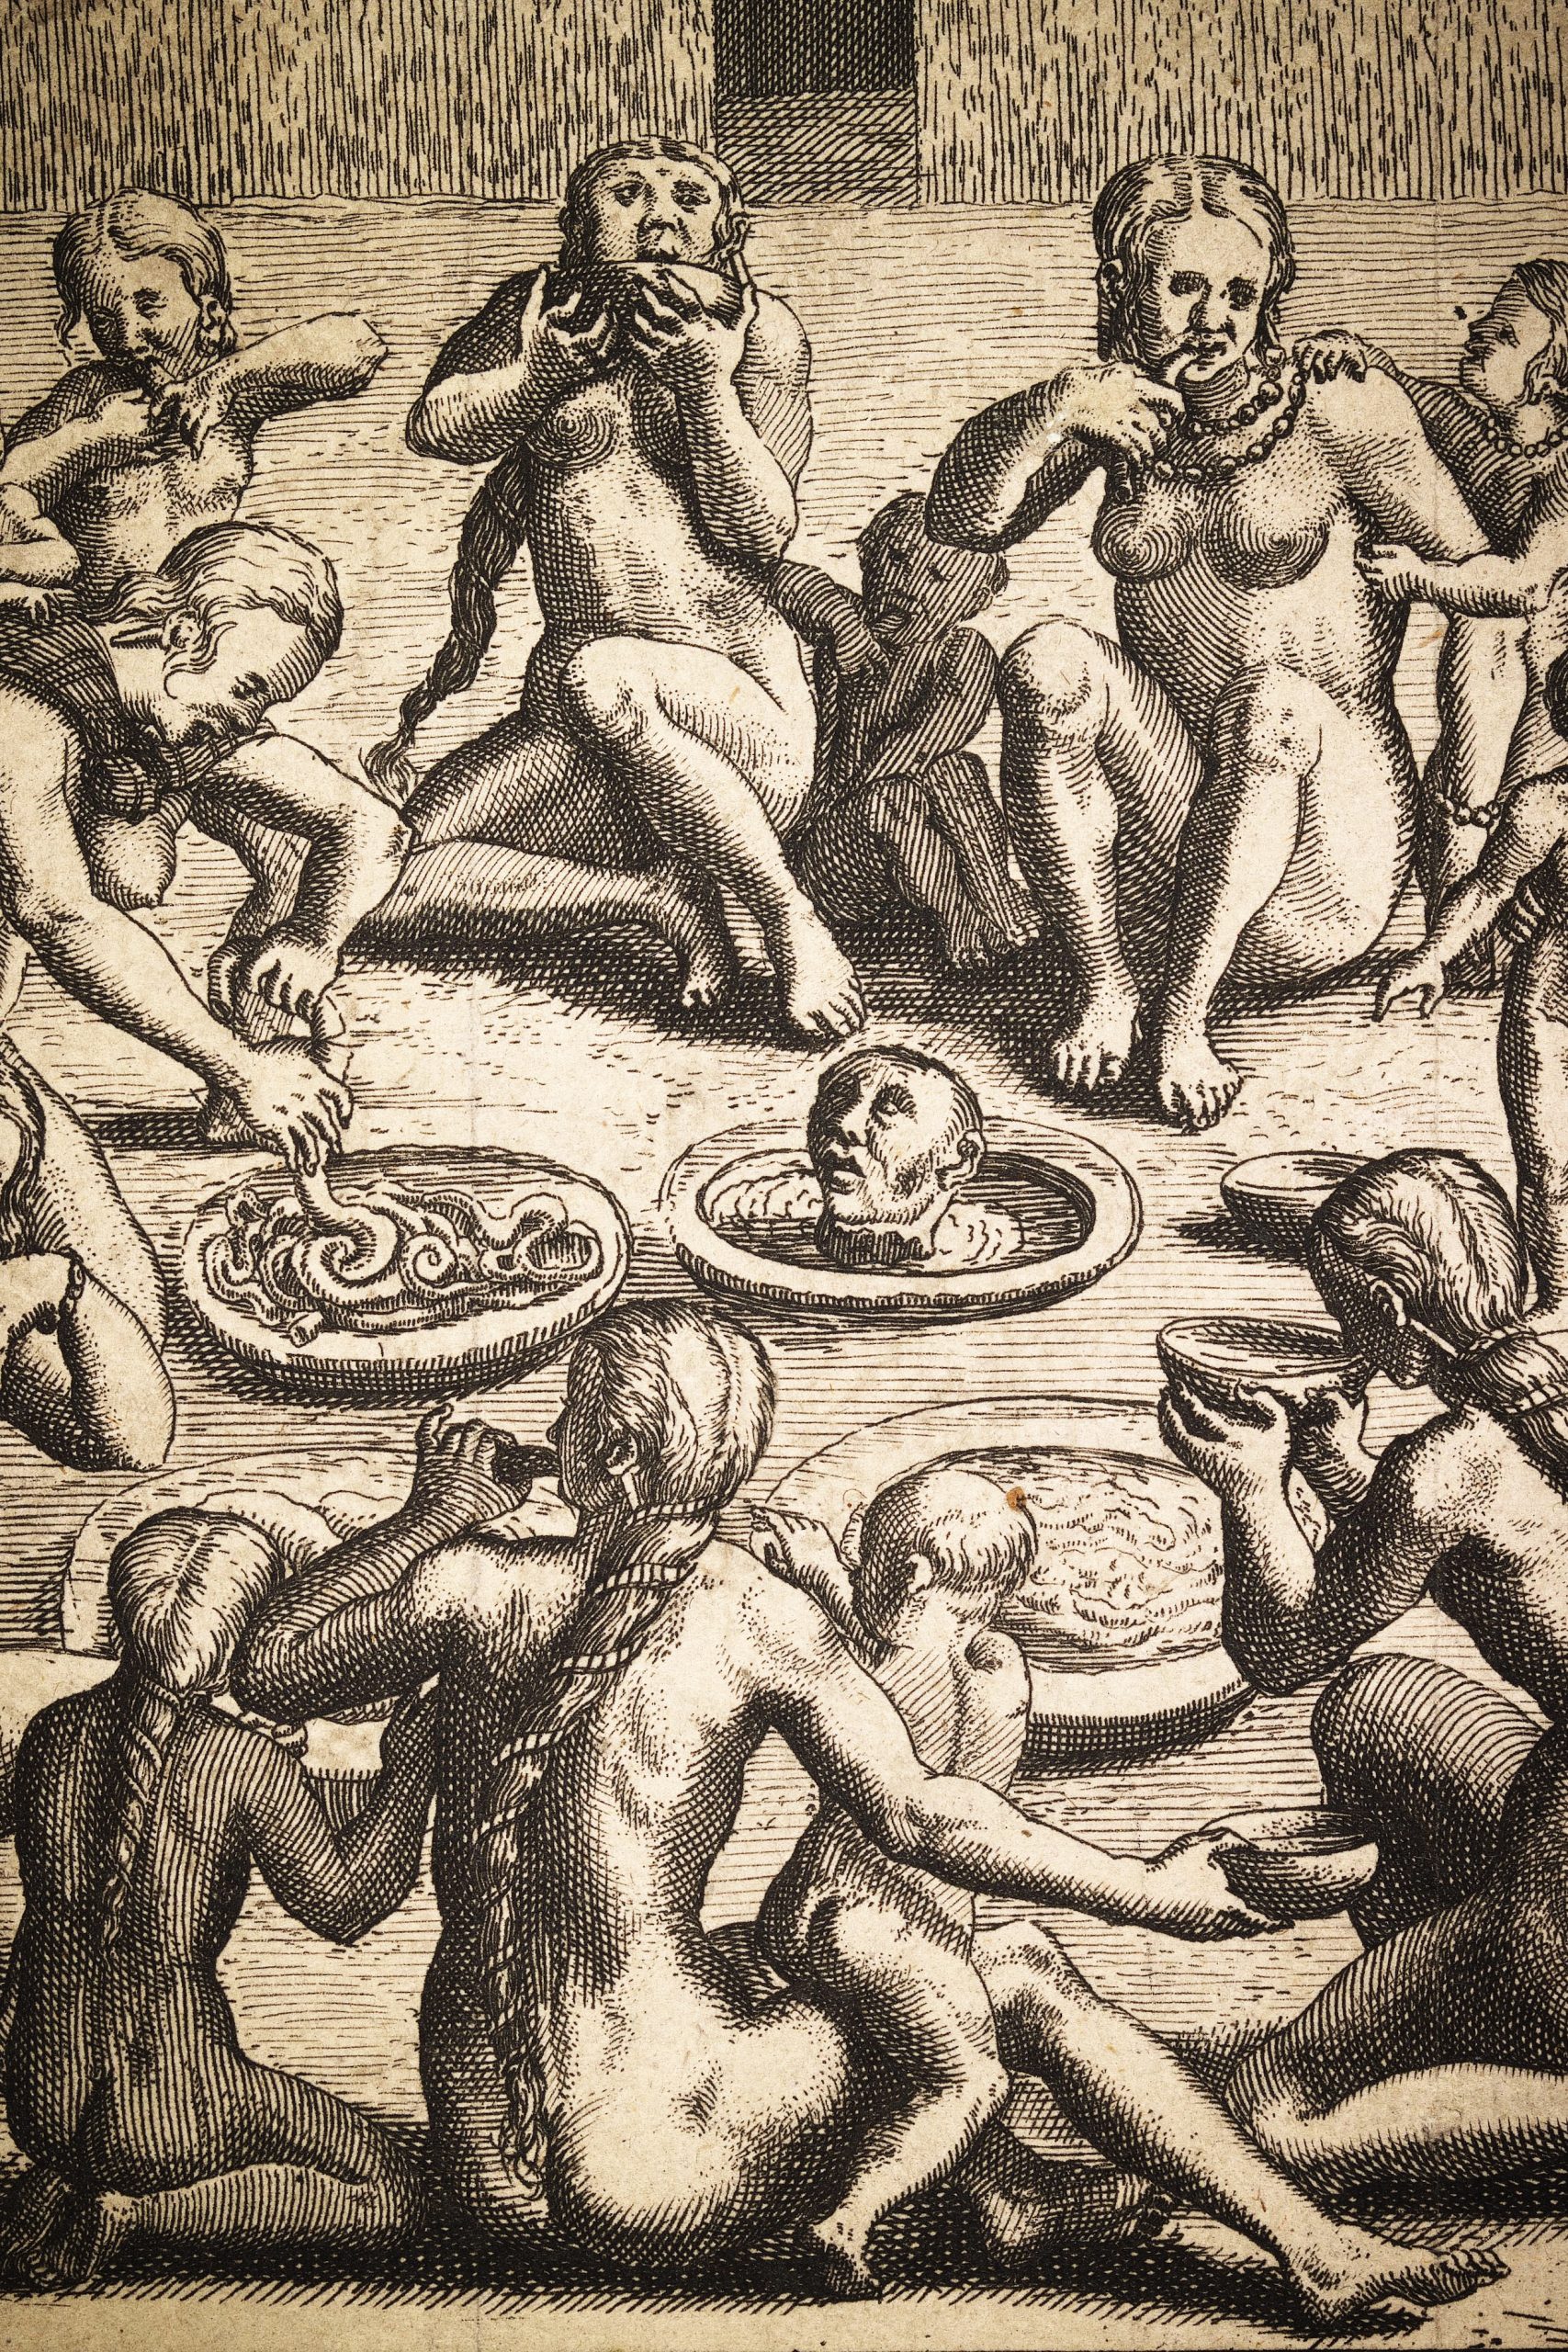 An sketch of a group of people sitting in a circle and consuming various human body parts.